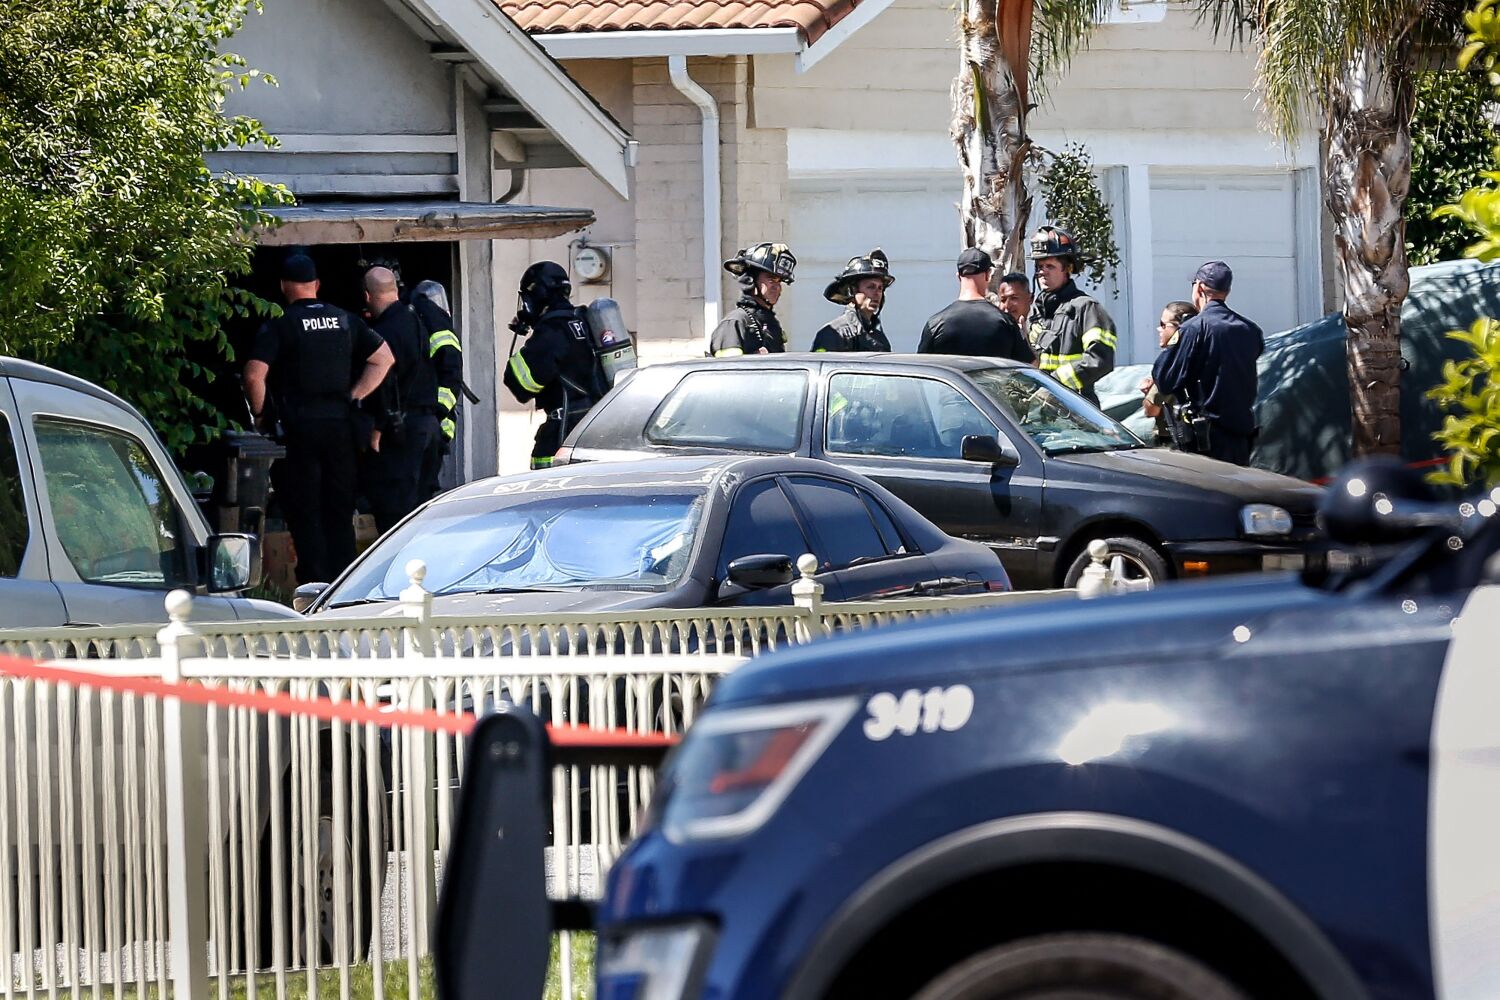 He set his house on fire then killed 9 co-workers. Gunman's rampage leaves San Jose reeling